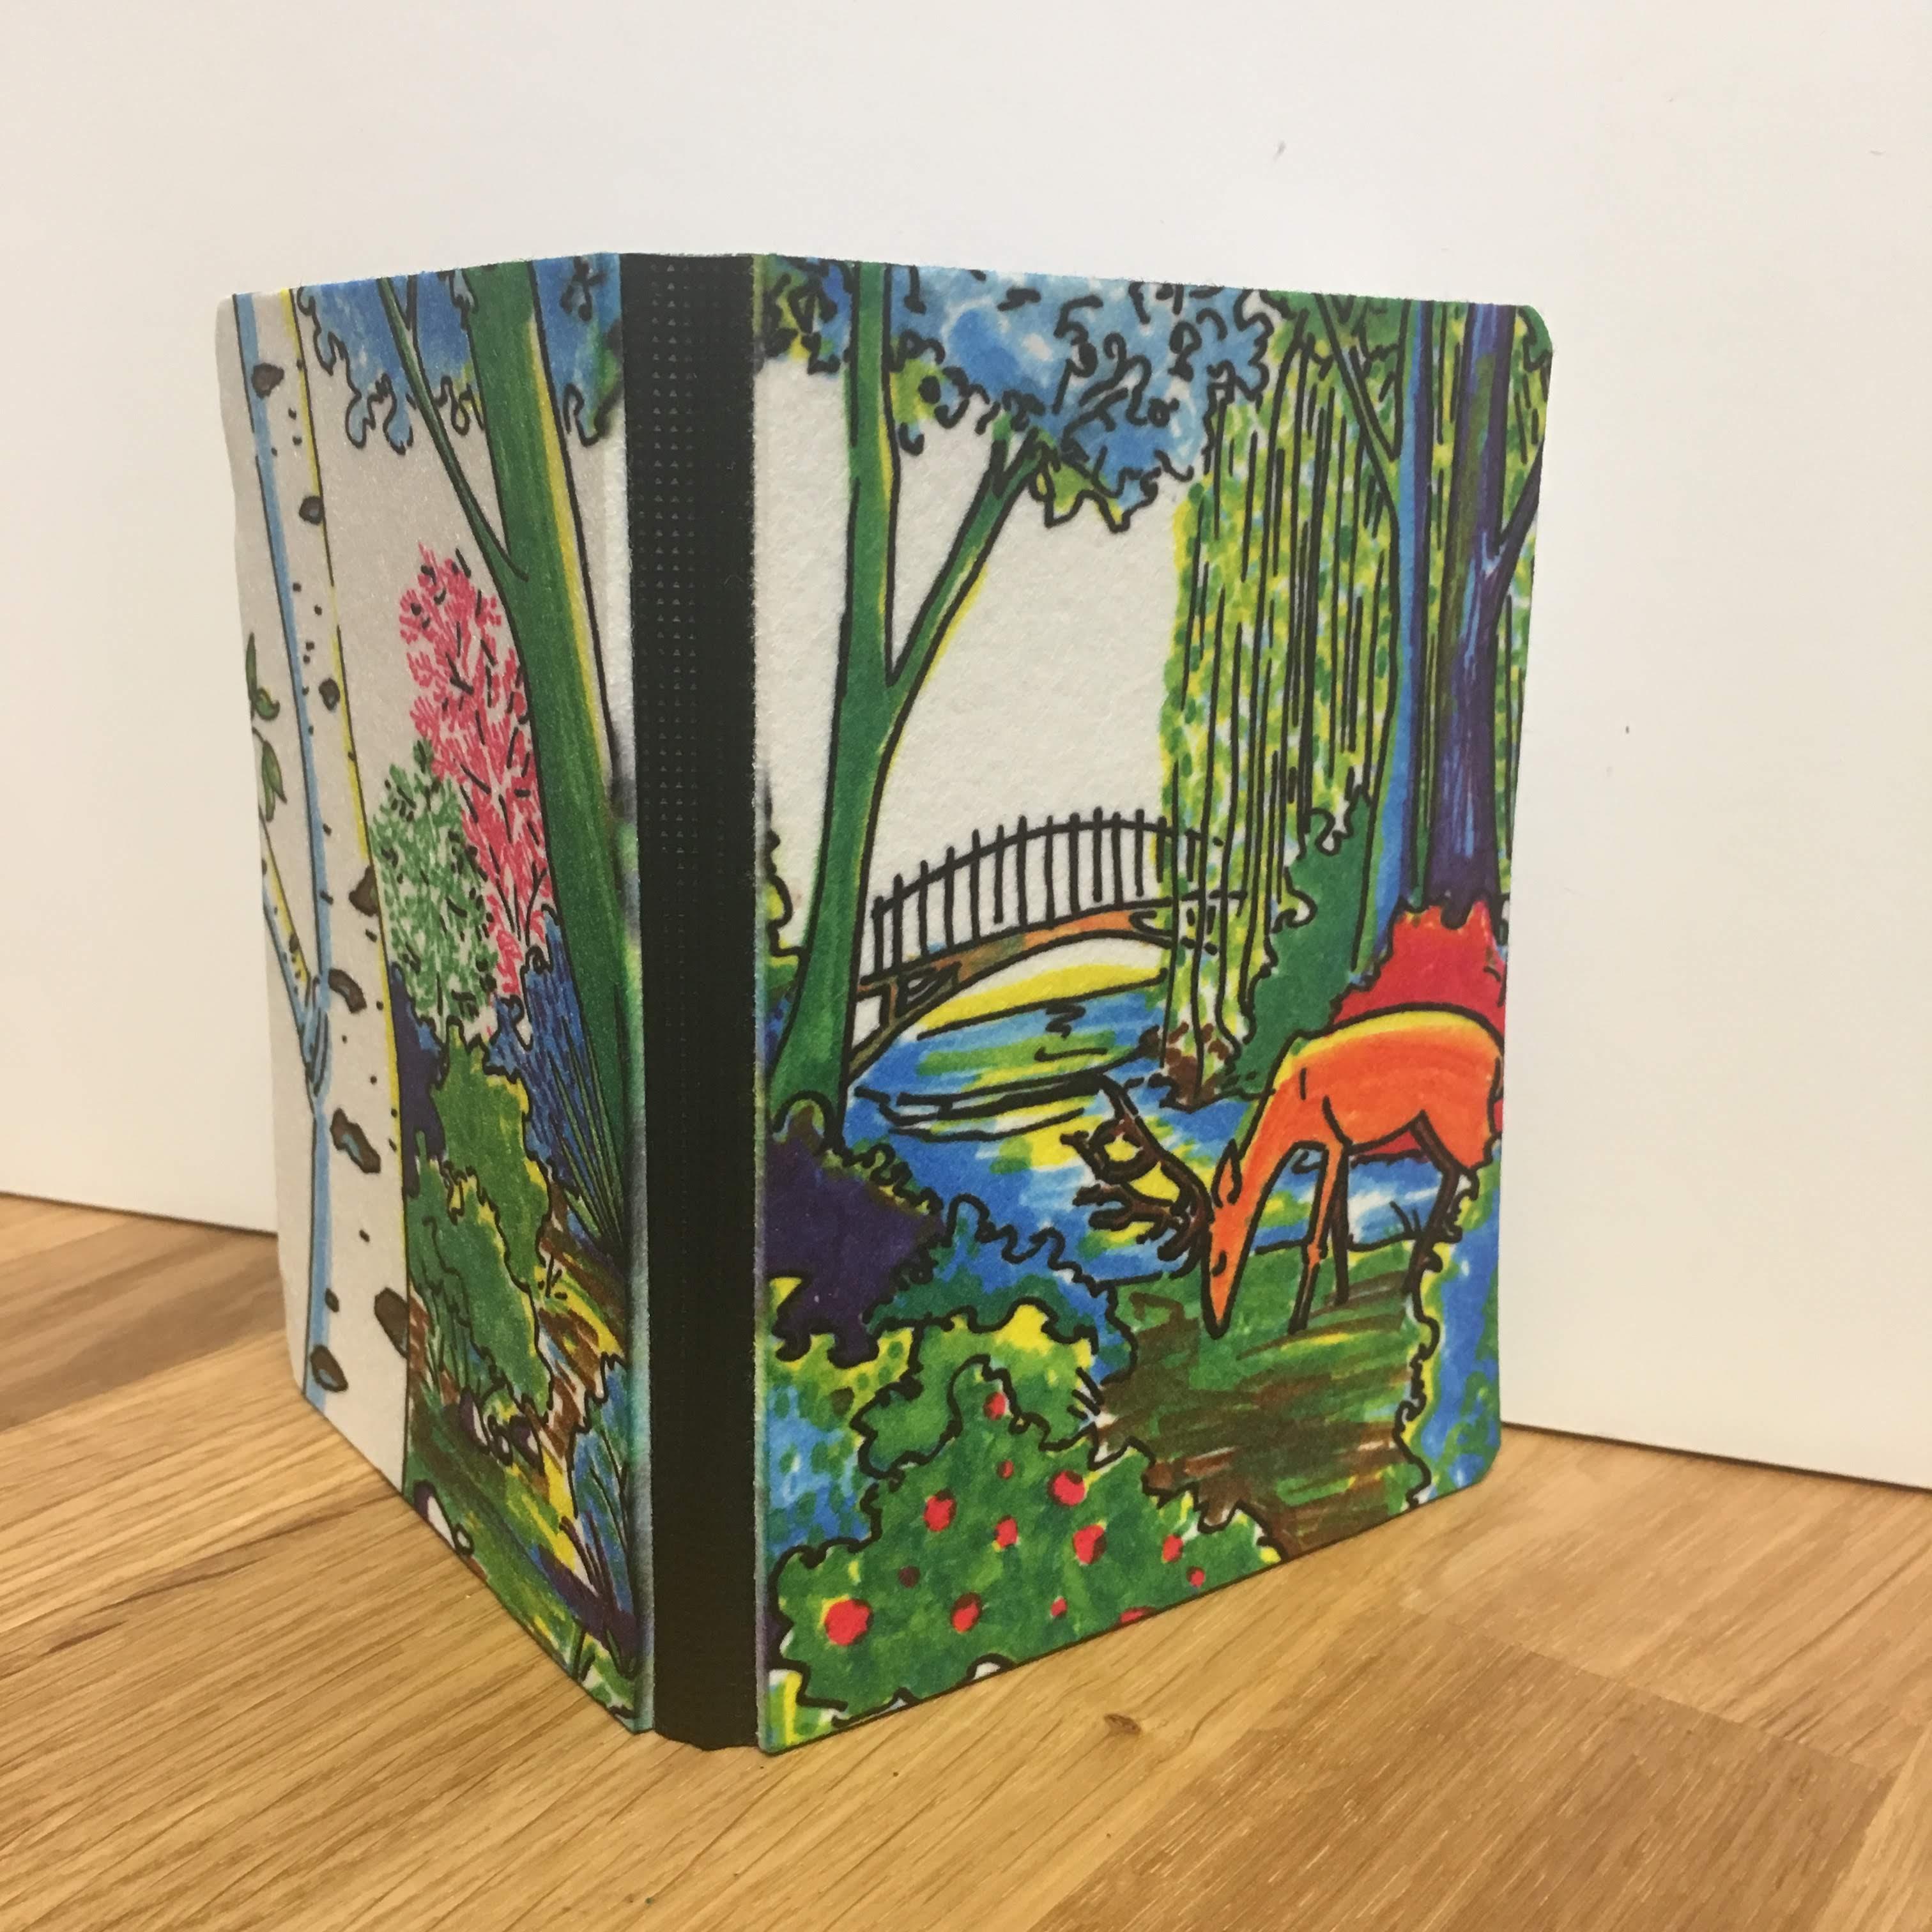 Hand Drawn Sketchbook made with sublimation printing